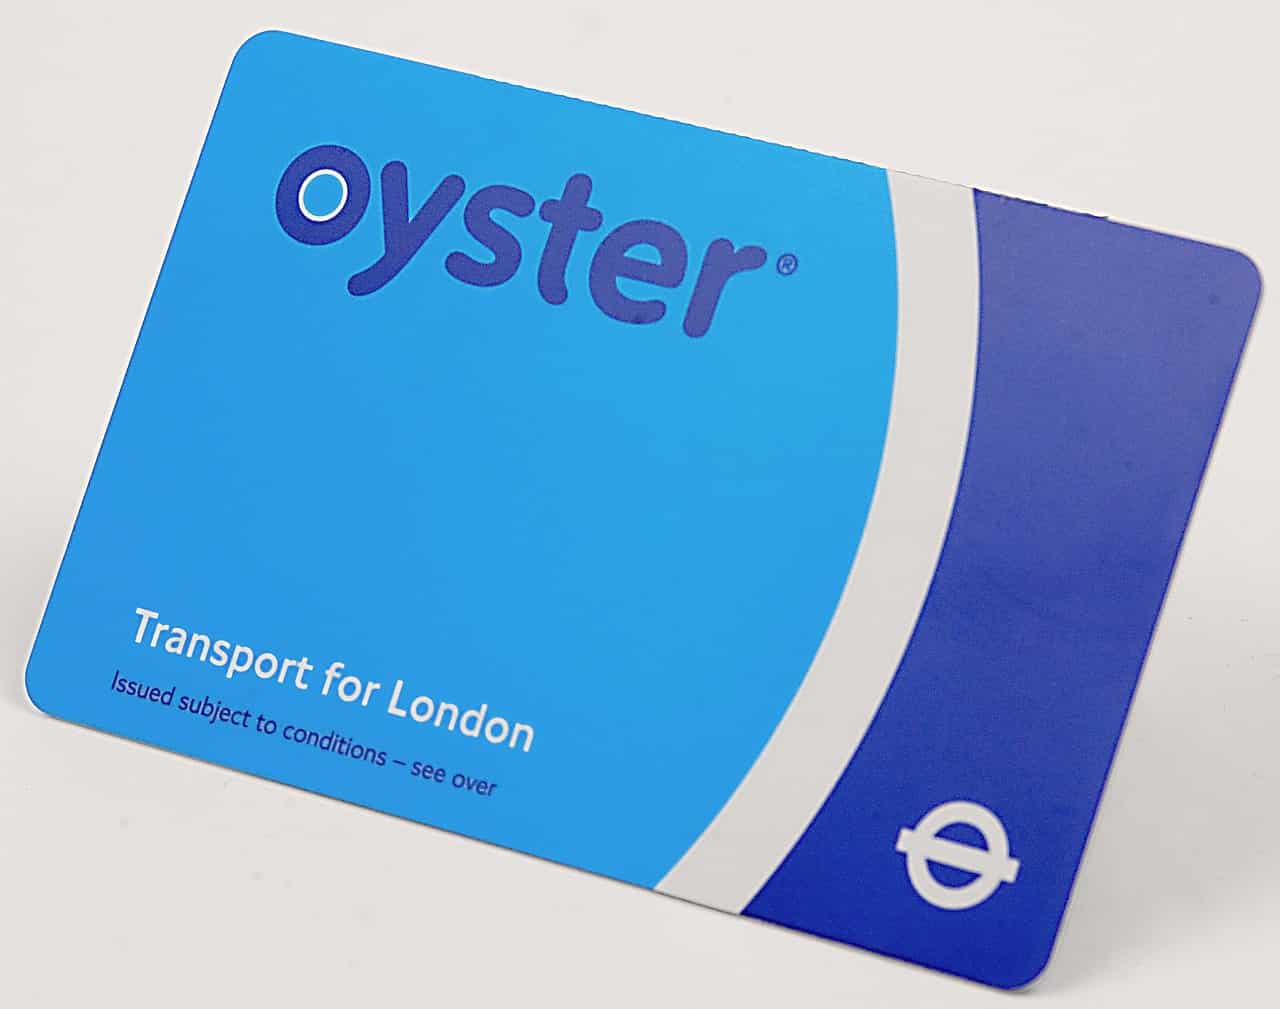 This is a photo of the London Oyster Card